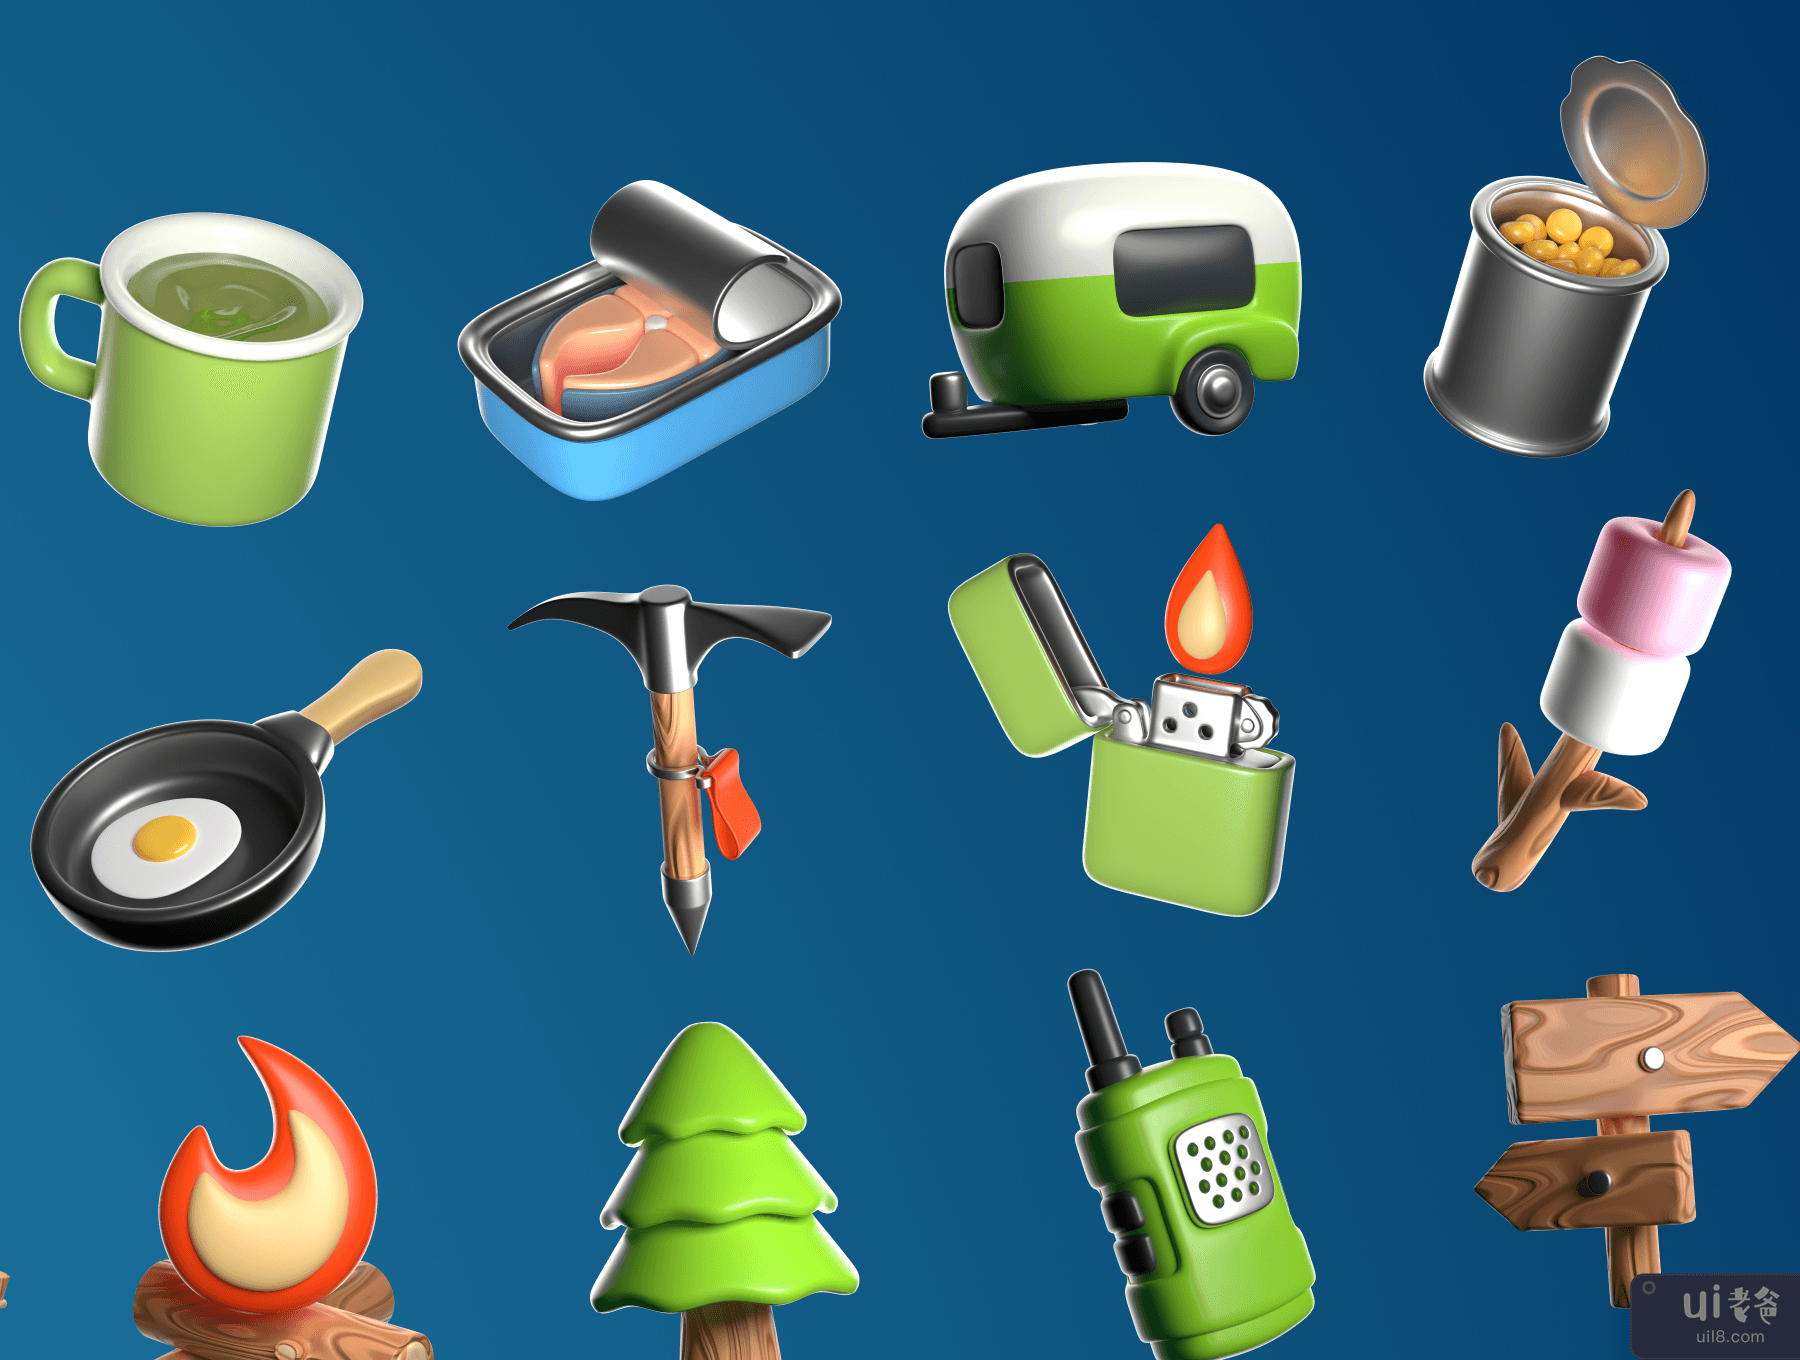 3D 图标集 - 露营和旅行 (3D Icon Set — Camping and Travel)插图